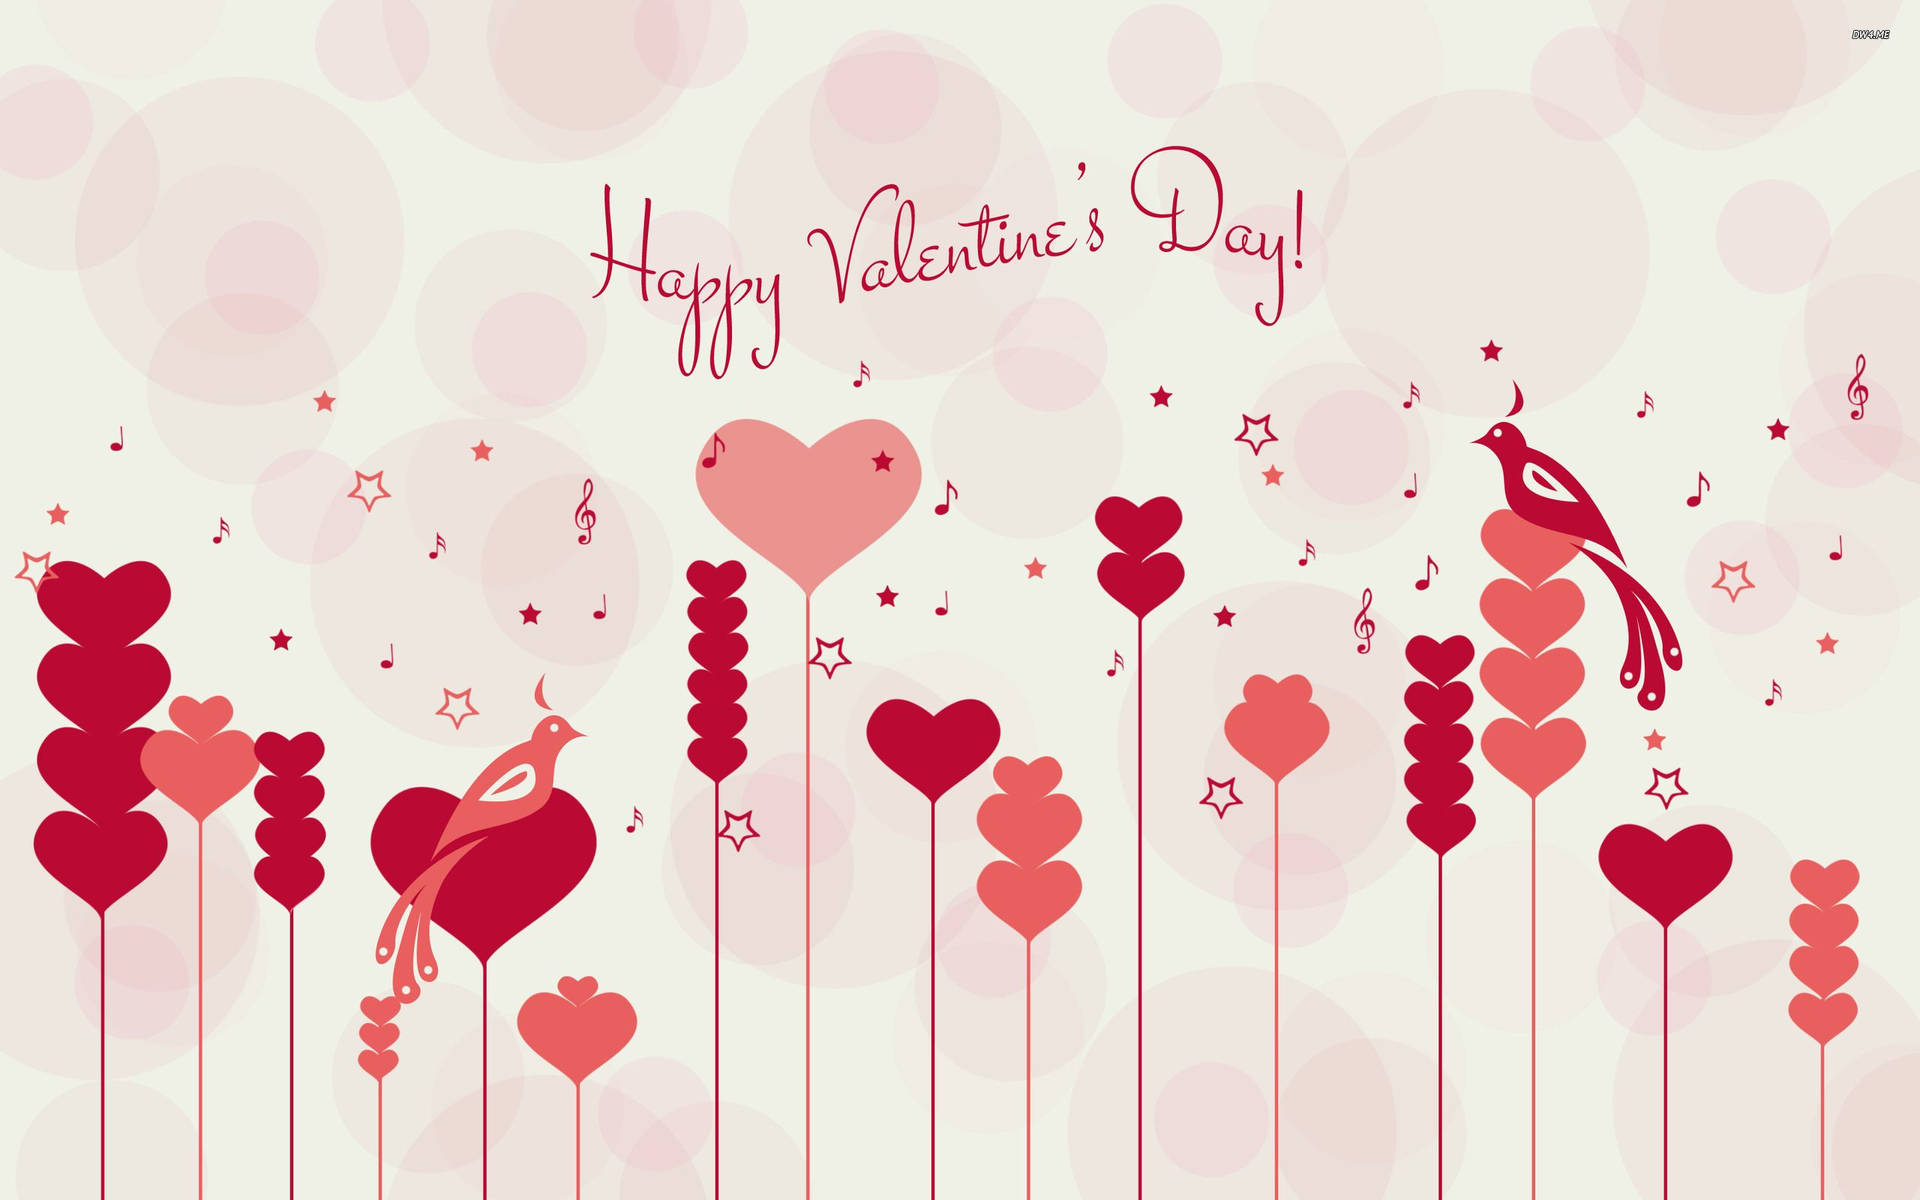 200+] Cute Valentines Day Background s | Wallpapers.com